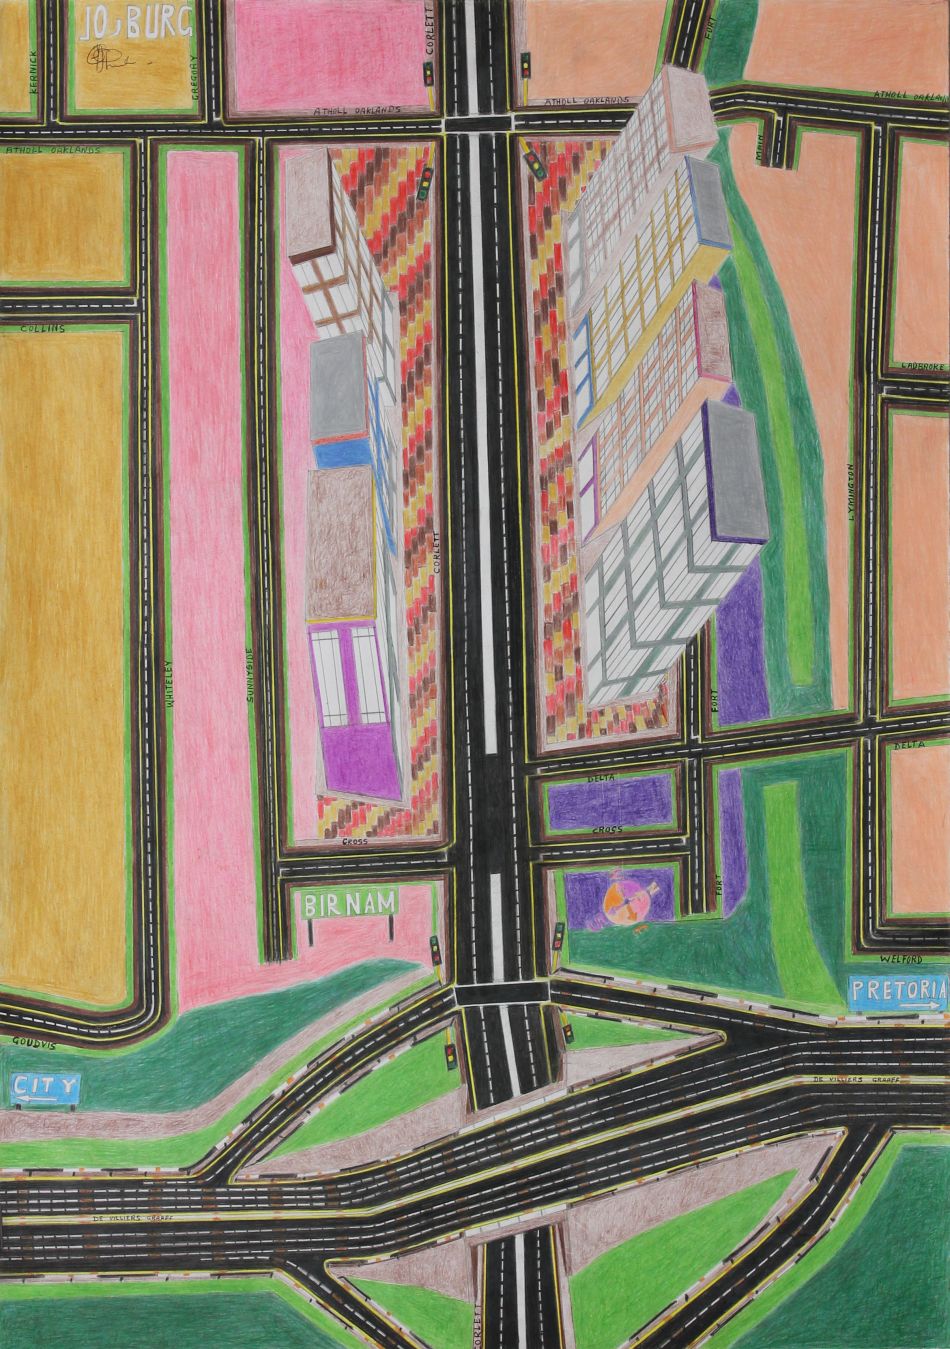 Click the image for a view of: Jo'burg (Corlett Drive). 2013. Colour pencil on paper. 860X710mm